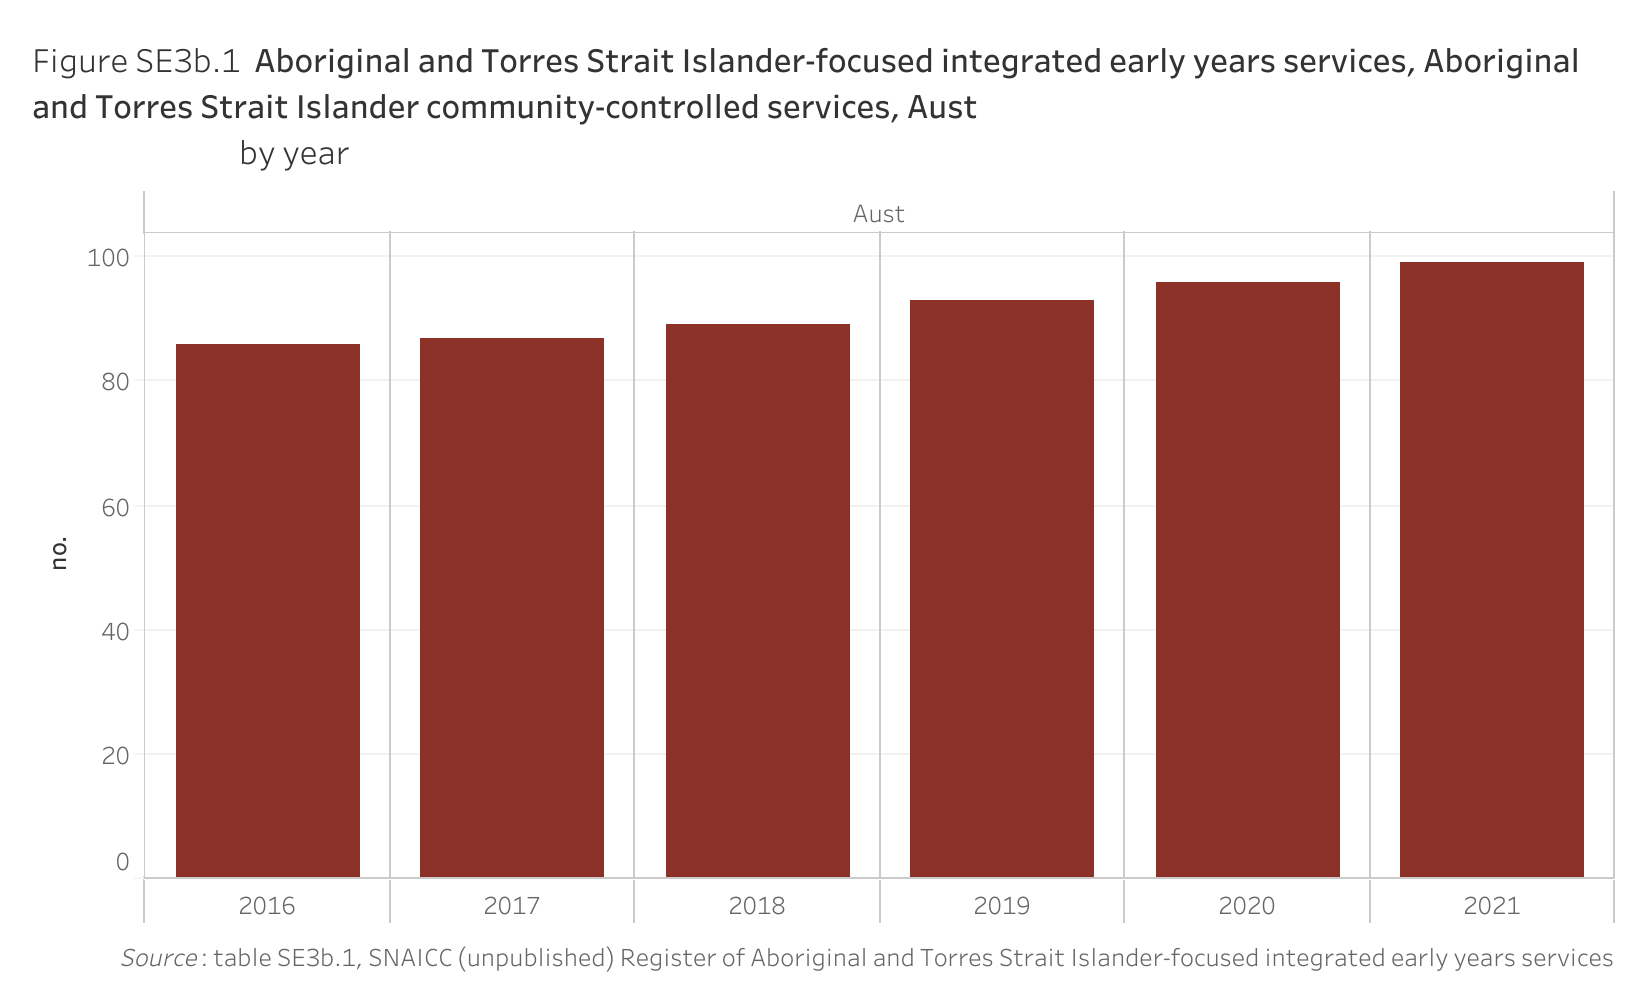 Figure SE3b.1. Bar chart showing the number of Aboriginal and Torres Strait Islander-focused integrated early years services in Australia that were Aboriginal and Torres Strait Islander community-controlled, by year. Data table of figure SE3b.1 is below.